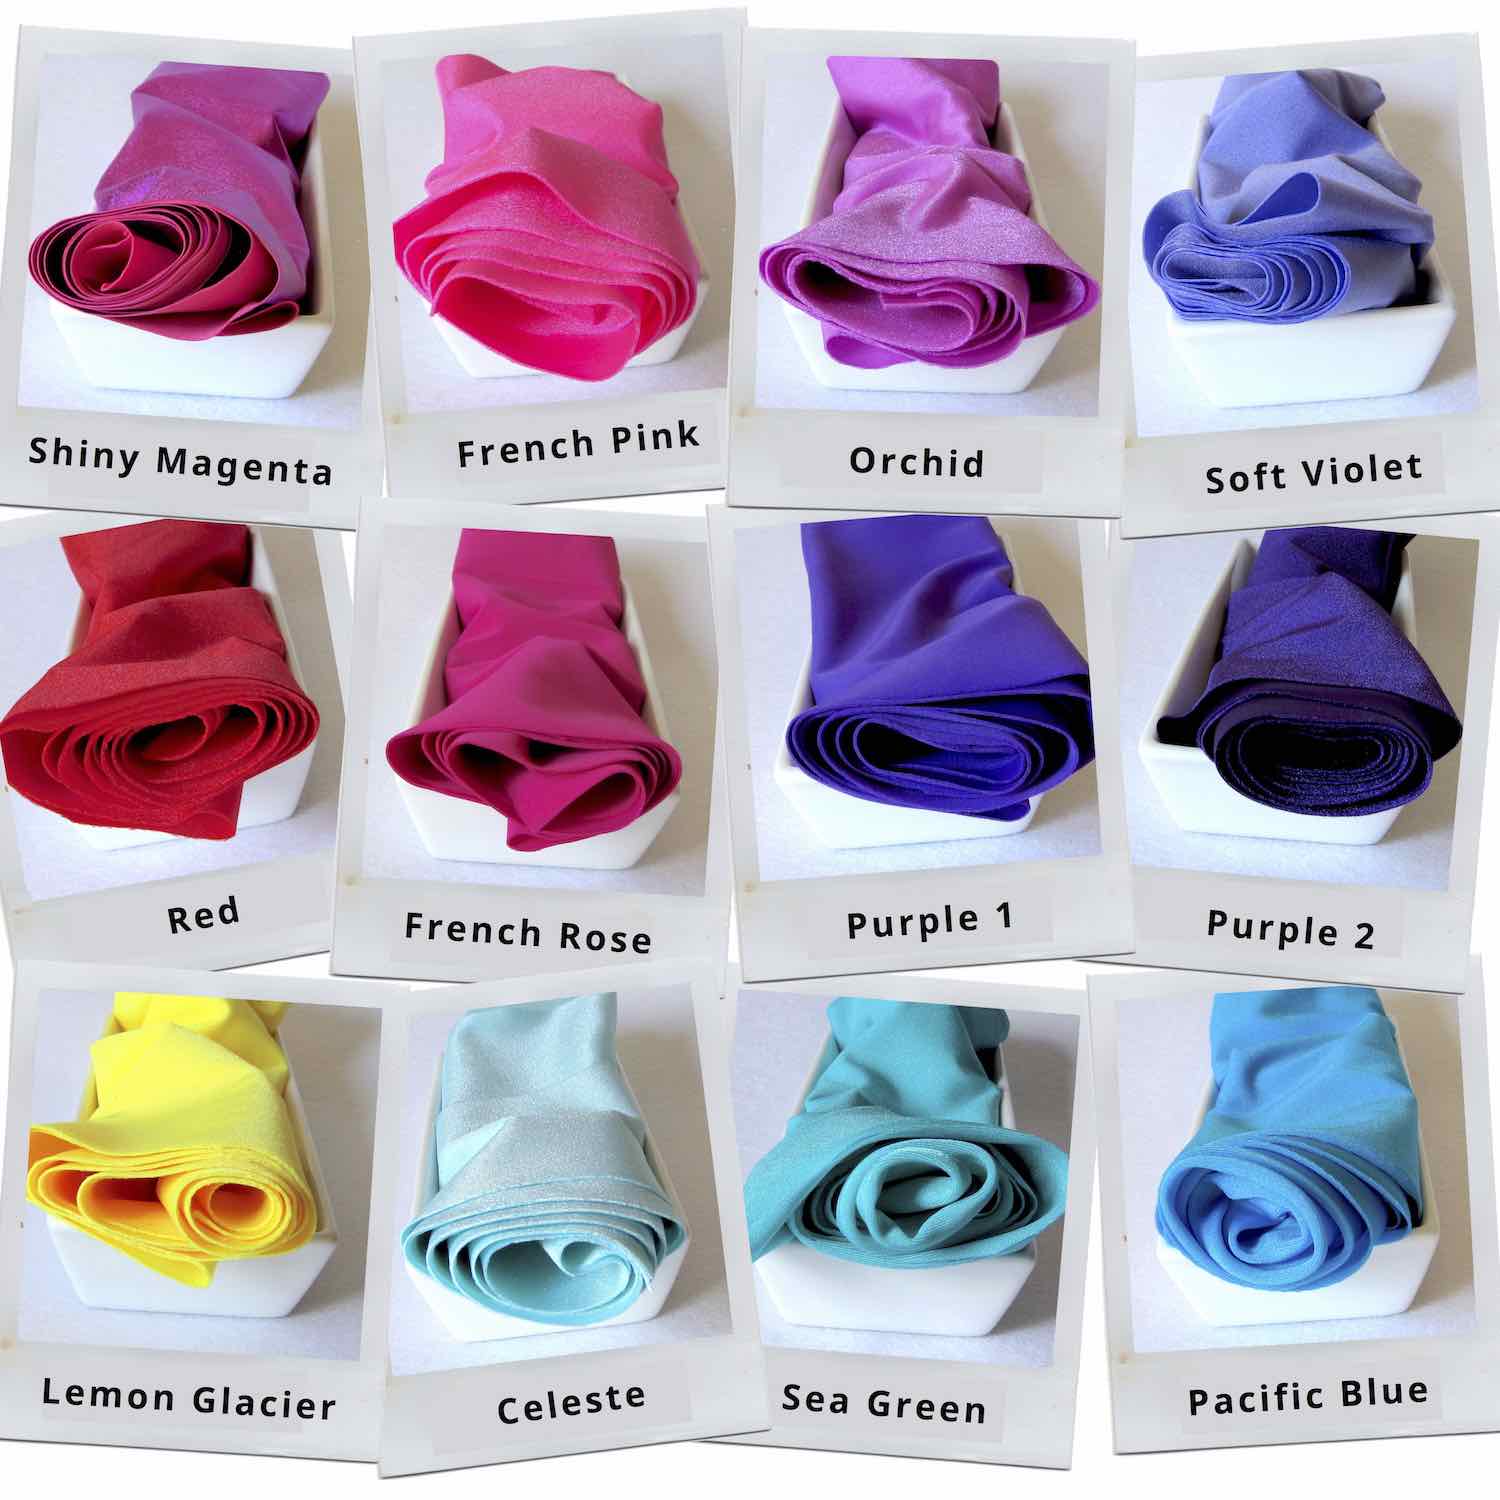 Fabric selection for soft and stylish limited edition Posh Me Fab boa scarves. Showing fabric colors of version Ooh-La-La.